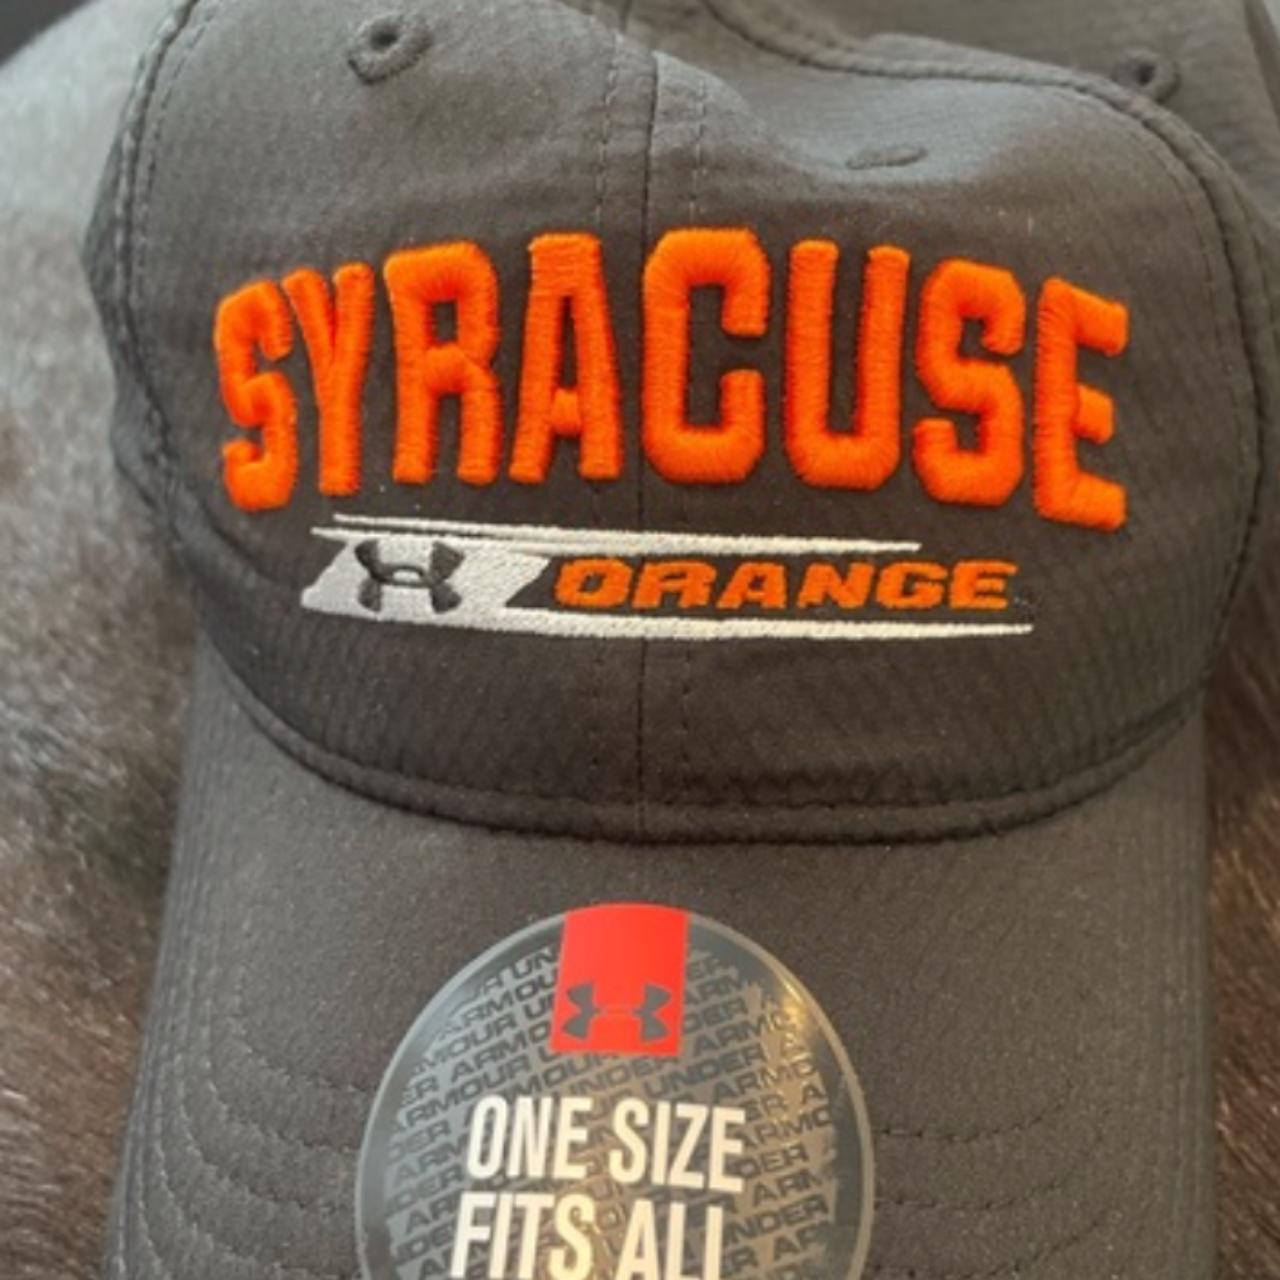 This is a new with tags Under Armor Syracuse